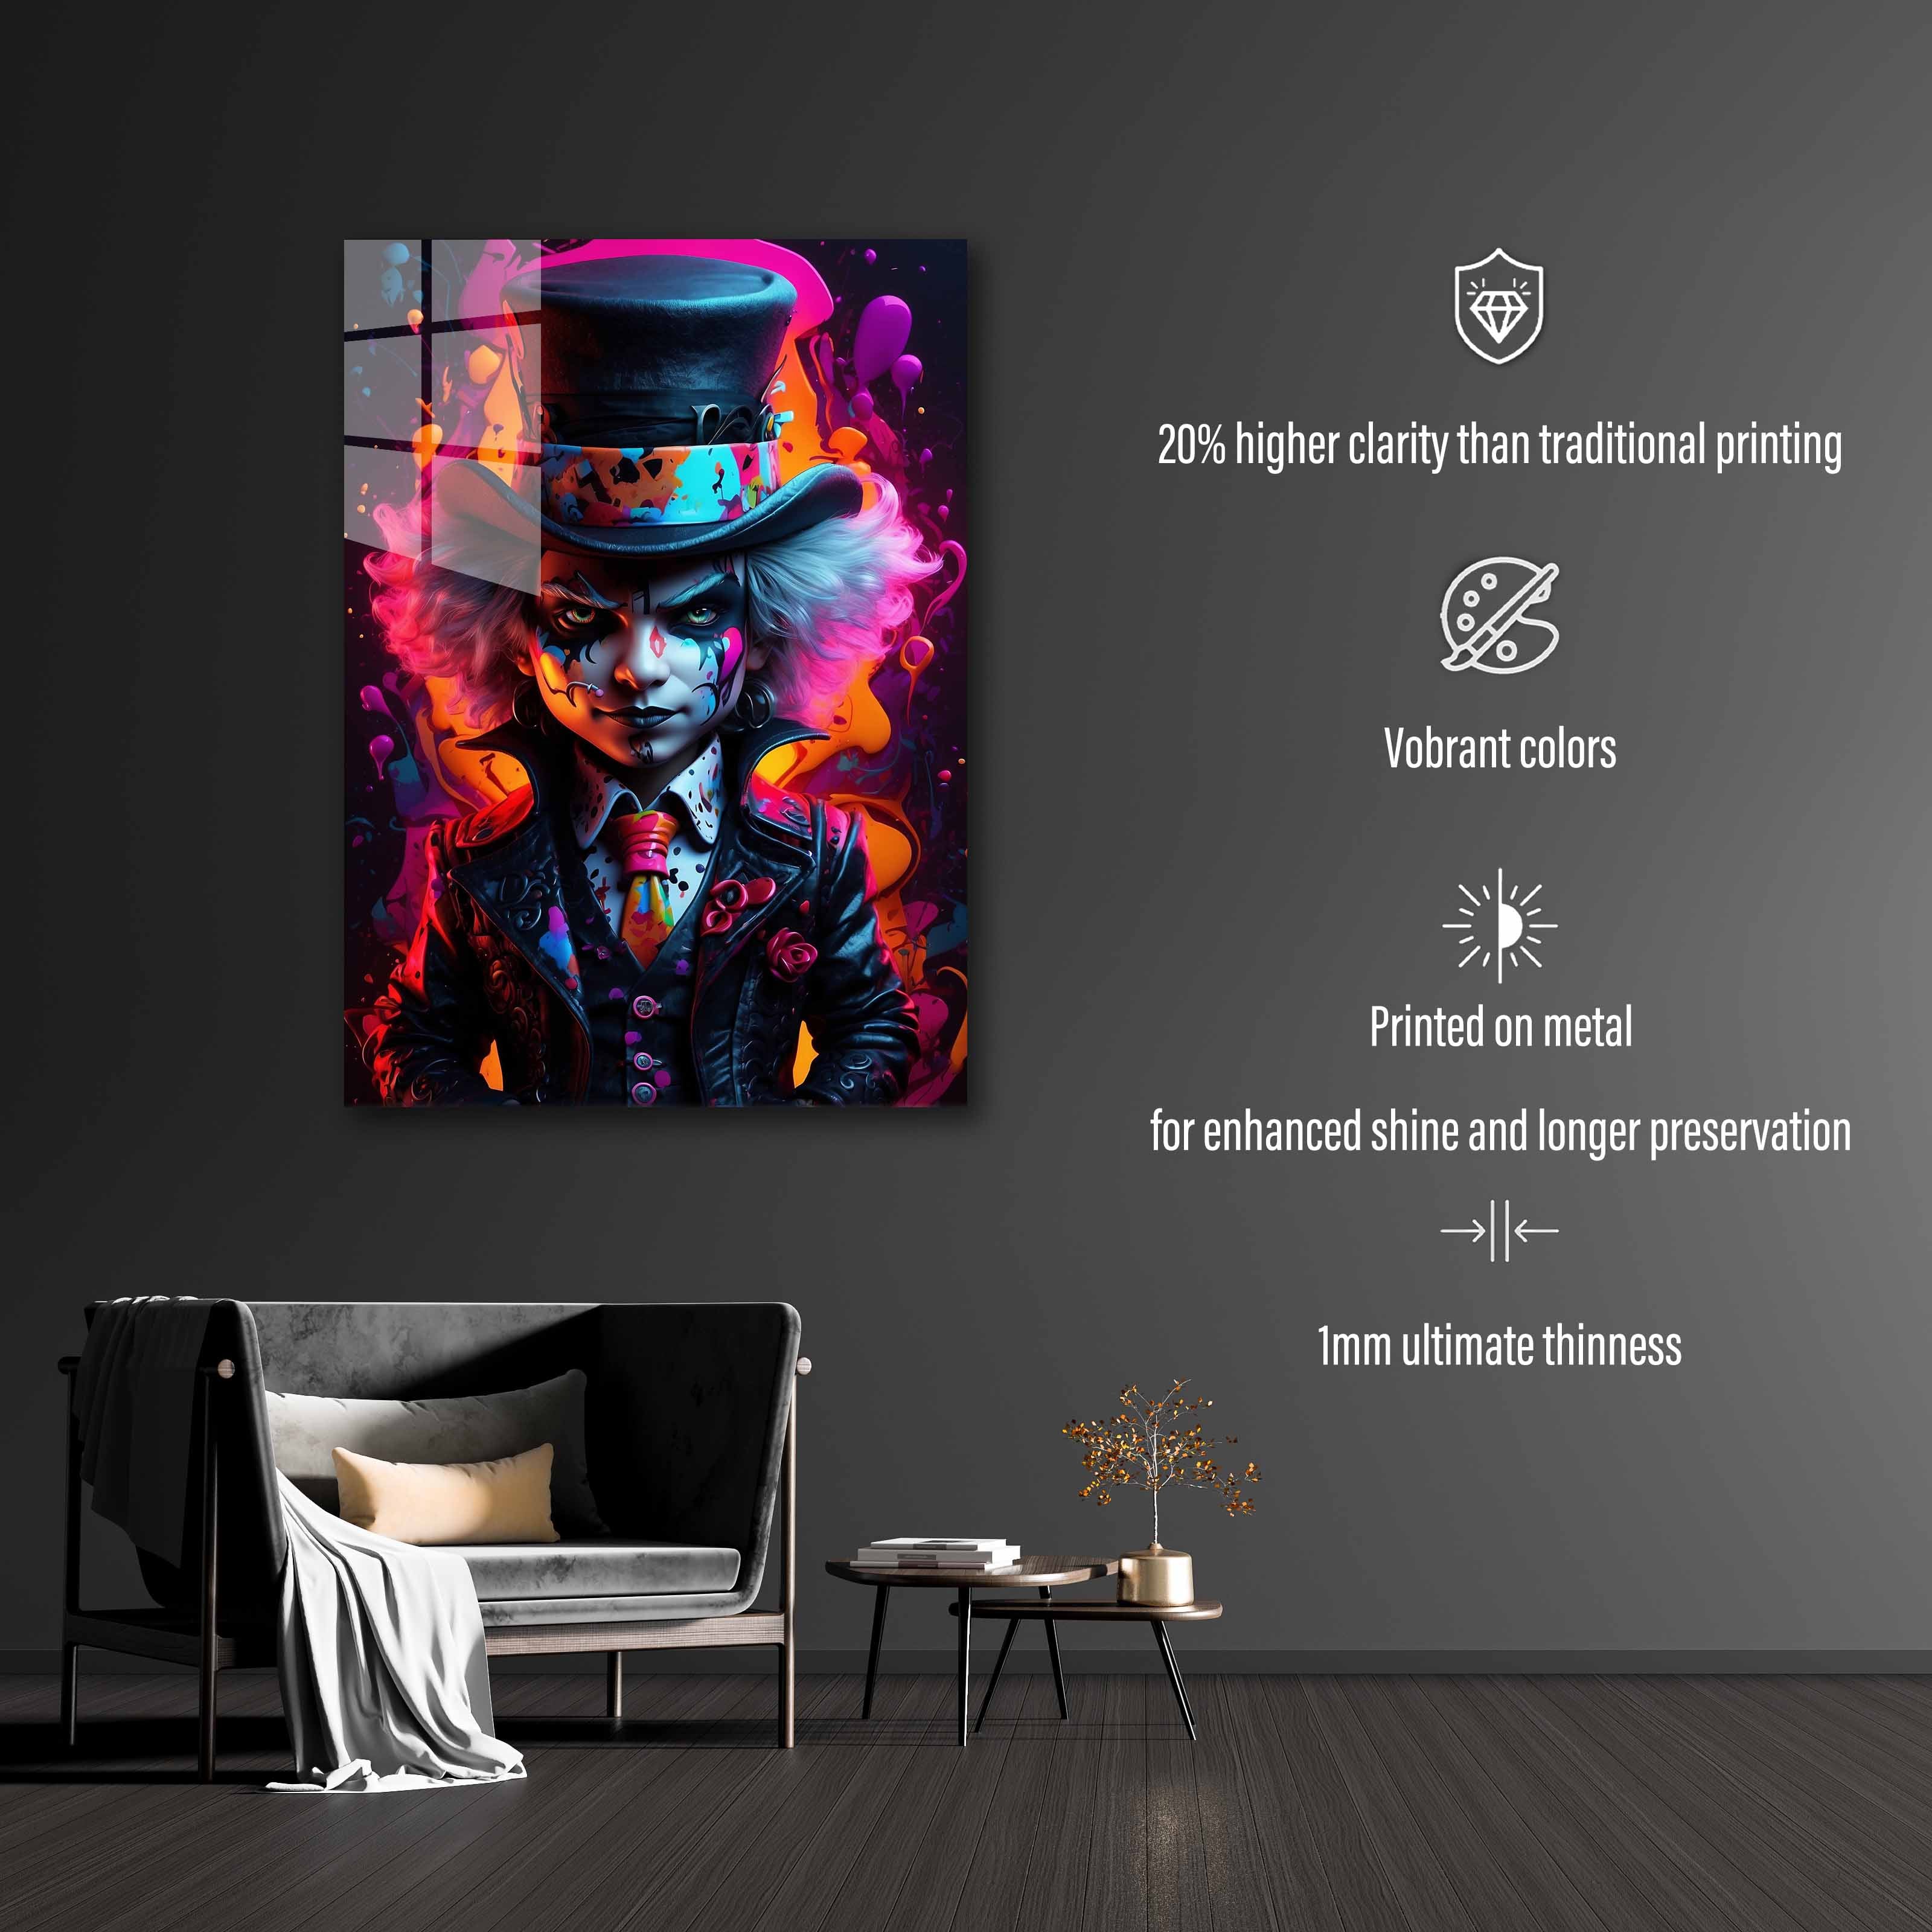 The Mad Hatter -rtwork by @Vivid Art Studios